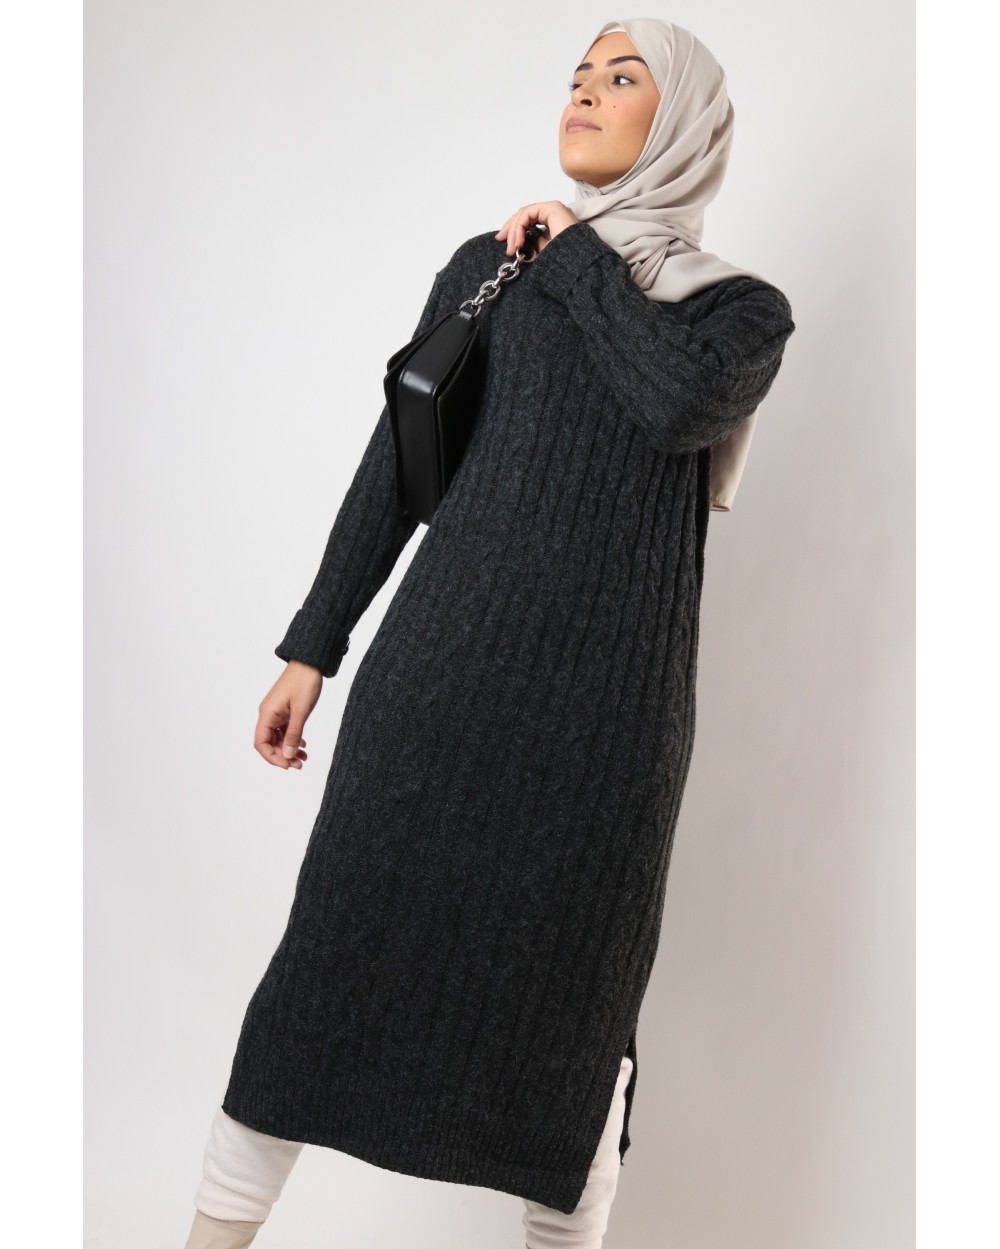 Roma sweater dress with slits